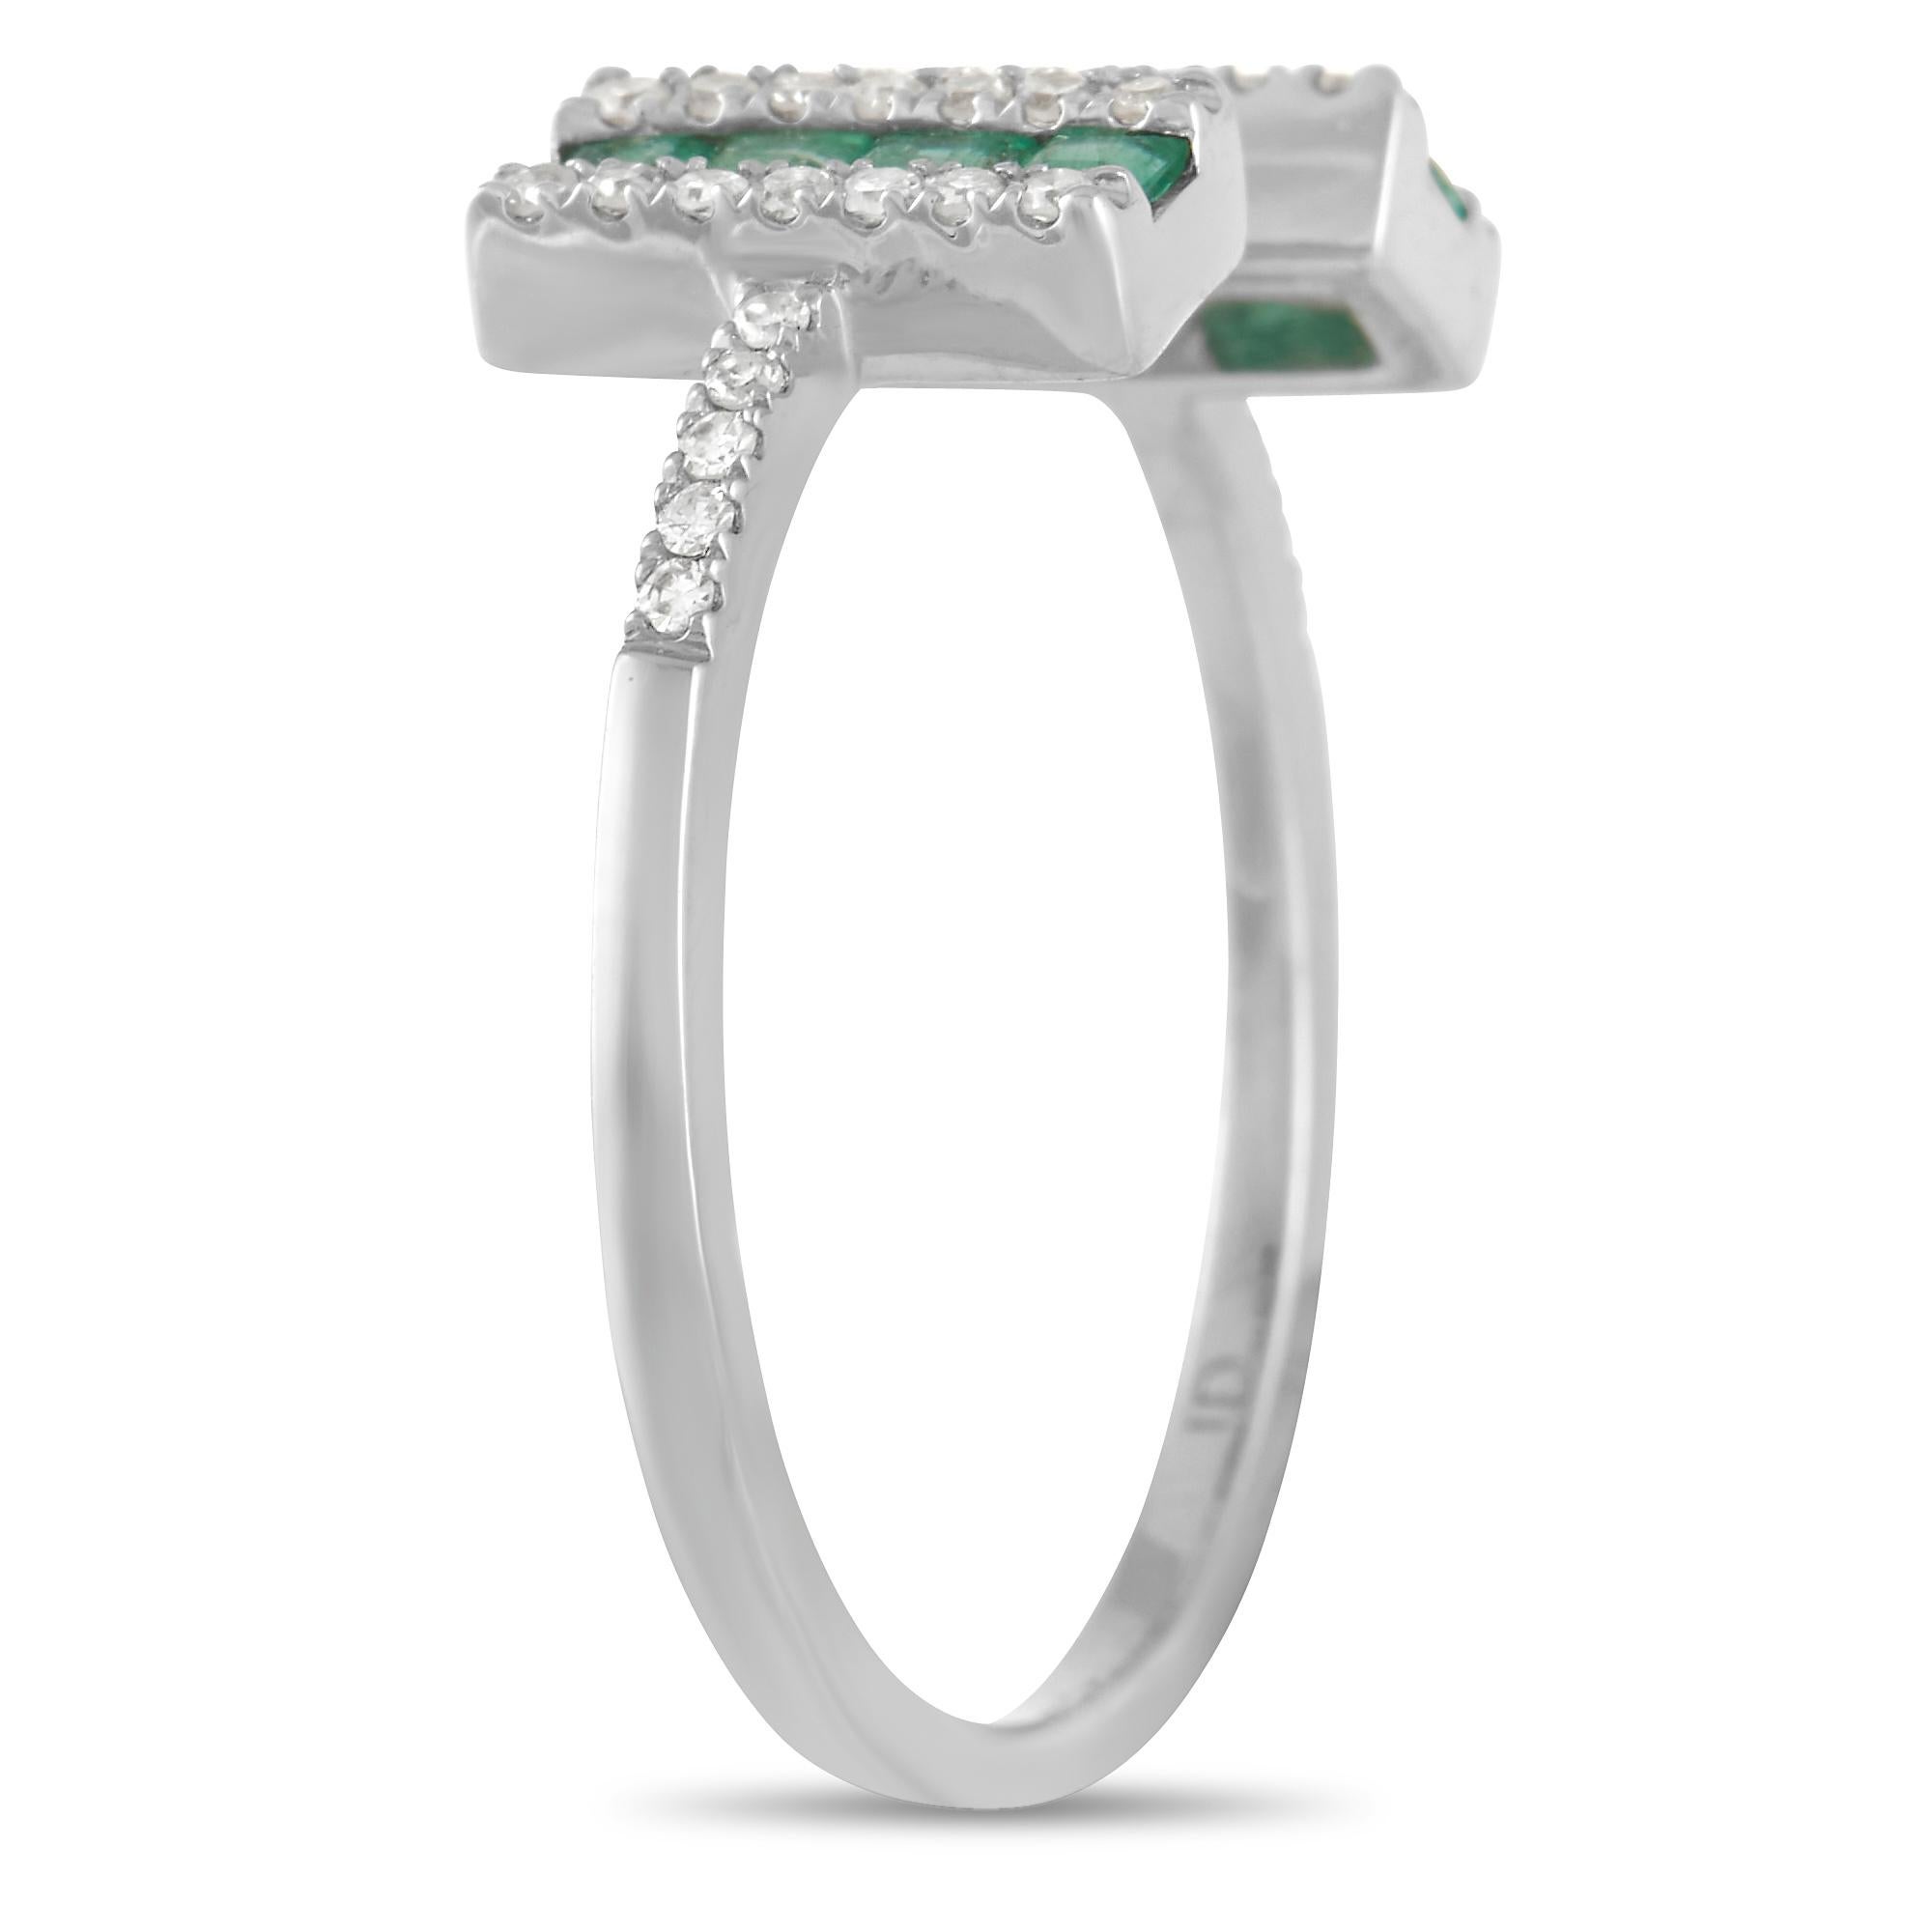 This elegant ring is simple and sophisticated all at once. The 14K White Gold setting comes to life thanks to the bold negative space at the center and captivating green emeralds. Adorned with diamonds totaling 0.16 carats, this piece features a 1mm